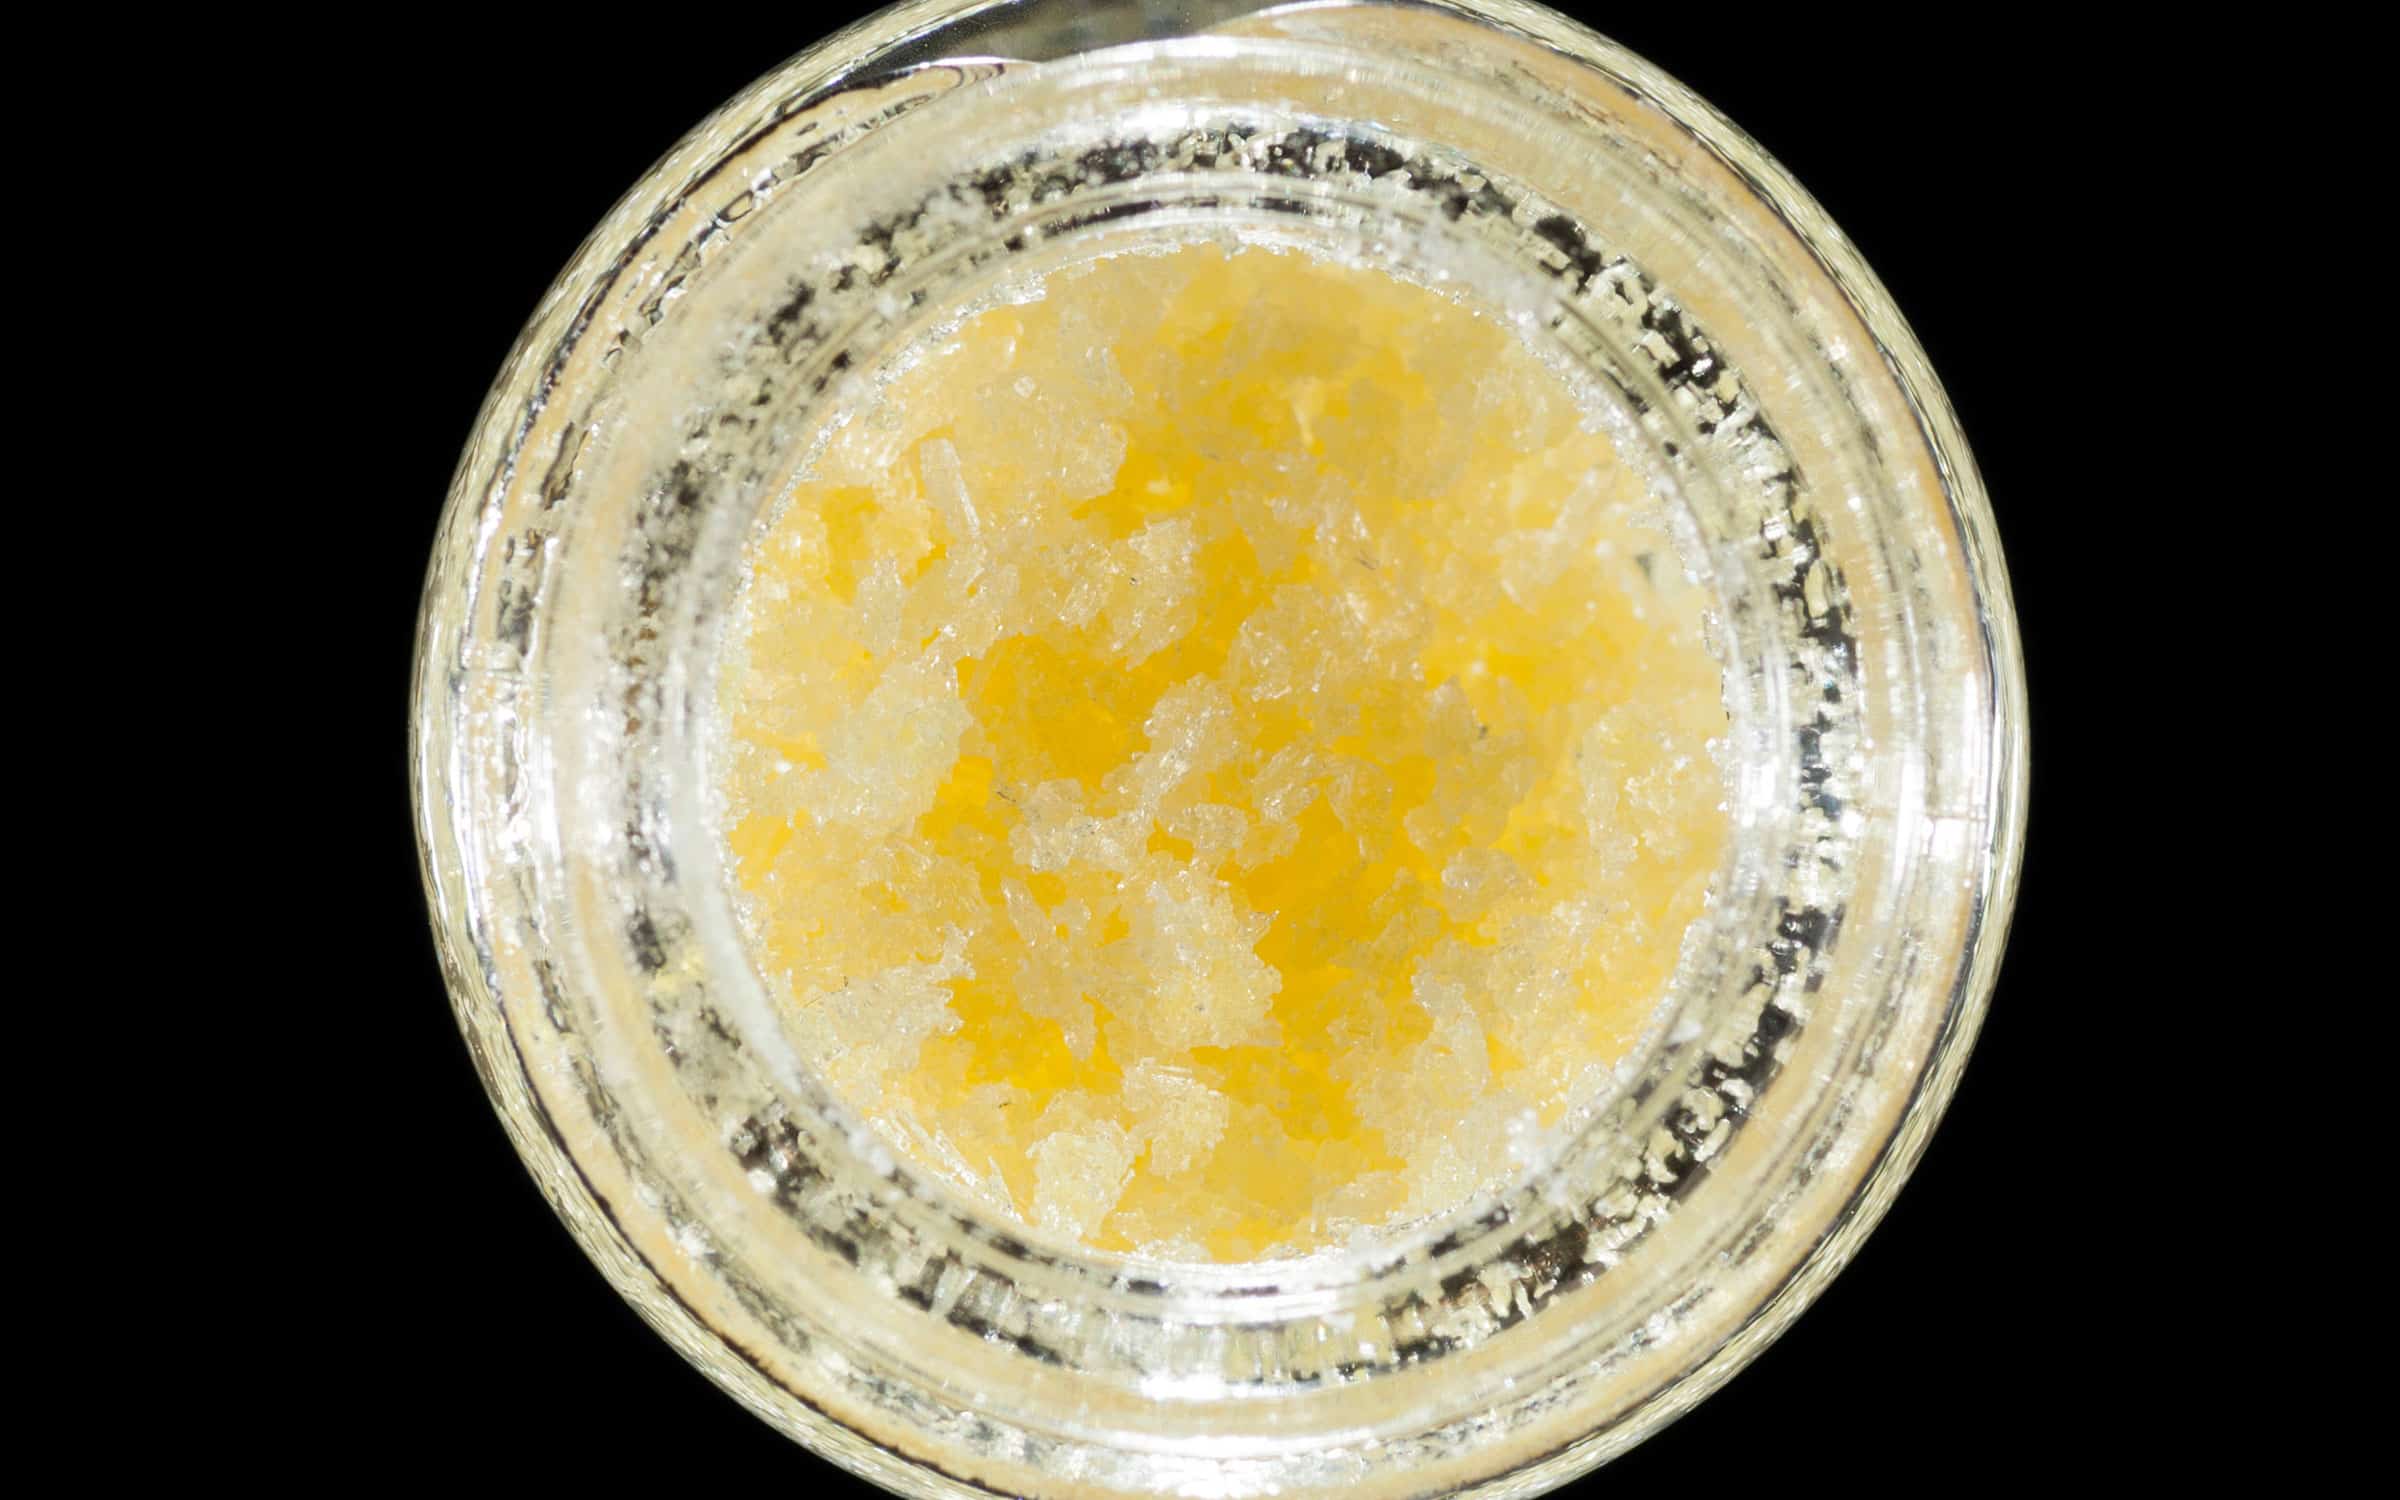 BEST CBD WAX CONCENTRATES - Cbd|Concentrates|Products|Concentrate|Hemp|Shatter|Wax|Isolate|Product|Thc|Terpenes|Oil|Effects|Cannabis|Cannabinoids|Spectrum|Plant|Form|Way|Pure|Extract|Powder|Crystals|Dab|Process|Extraction|Flower|People|Benefits|Vape|Body|Experience|Resin|Quality|Waxes|Health|Time|Potency|Amount|Forms|Cbd Concentrates|Cbd Concentrate|Cbd Wax|Cbd Shatter|Cbd Products|Cbd Isolate|Dab Rig|Cannabis Plant|Live Resin|Hemp Plant|Cbd Waxes|Free Shipping|Cbd Oil|Cbd Crystals|Tweedle Farms|Cbd Dabs|Full Spectrum Cbd|Dab Pen|Extraction Process|Daily Basis|Cbd Isolates|Entourage Effect|Scientific Hemp Oil®|Blue Moon Hemp|Cbd Oil Solutions|Pure Cbd Isolate|Pure Cbd|Small Amount|United States|Cbd Flower